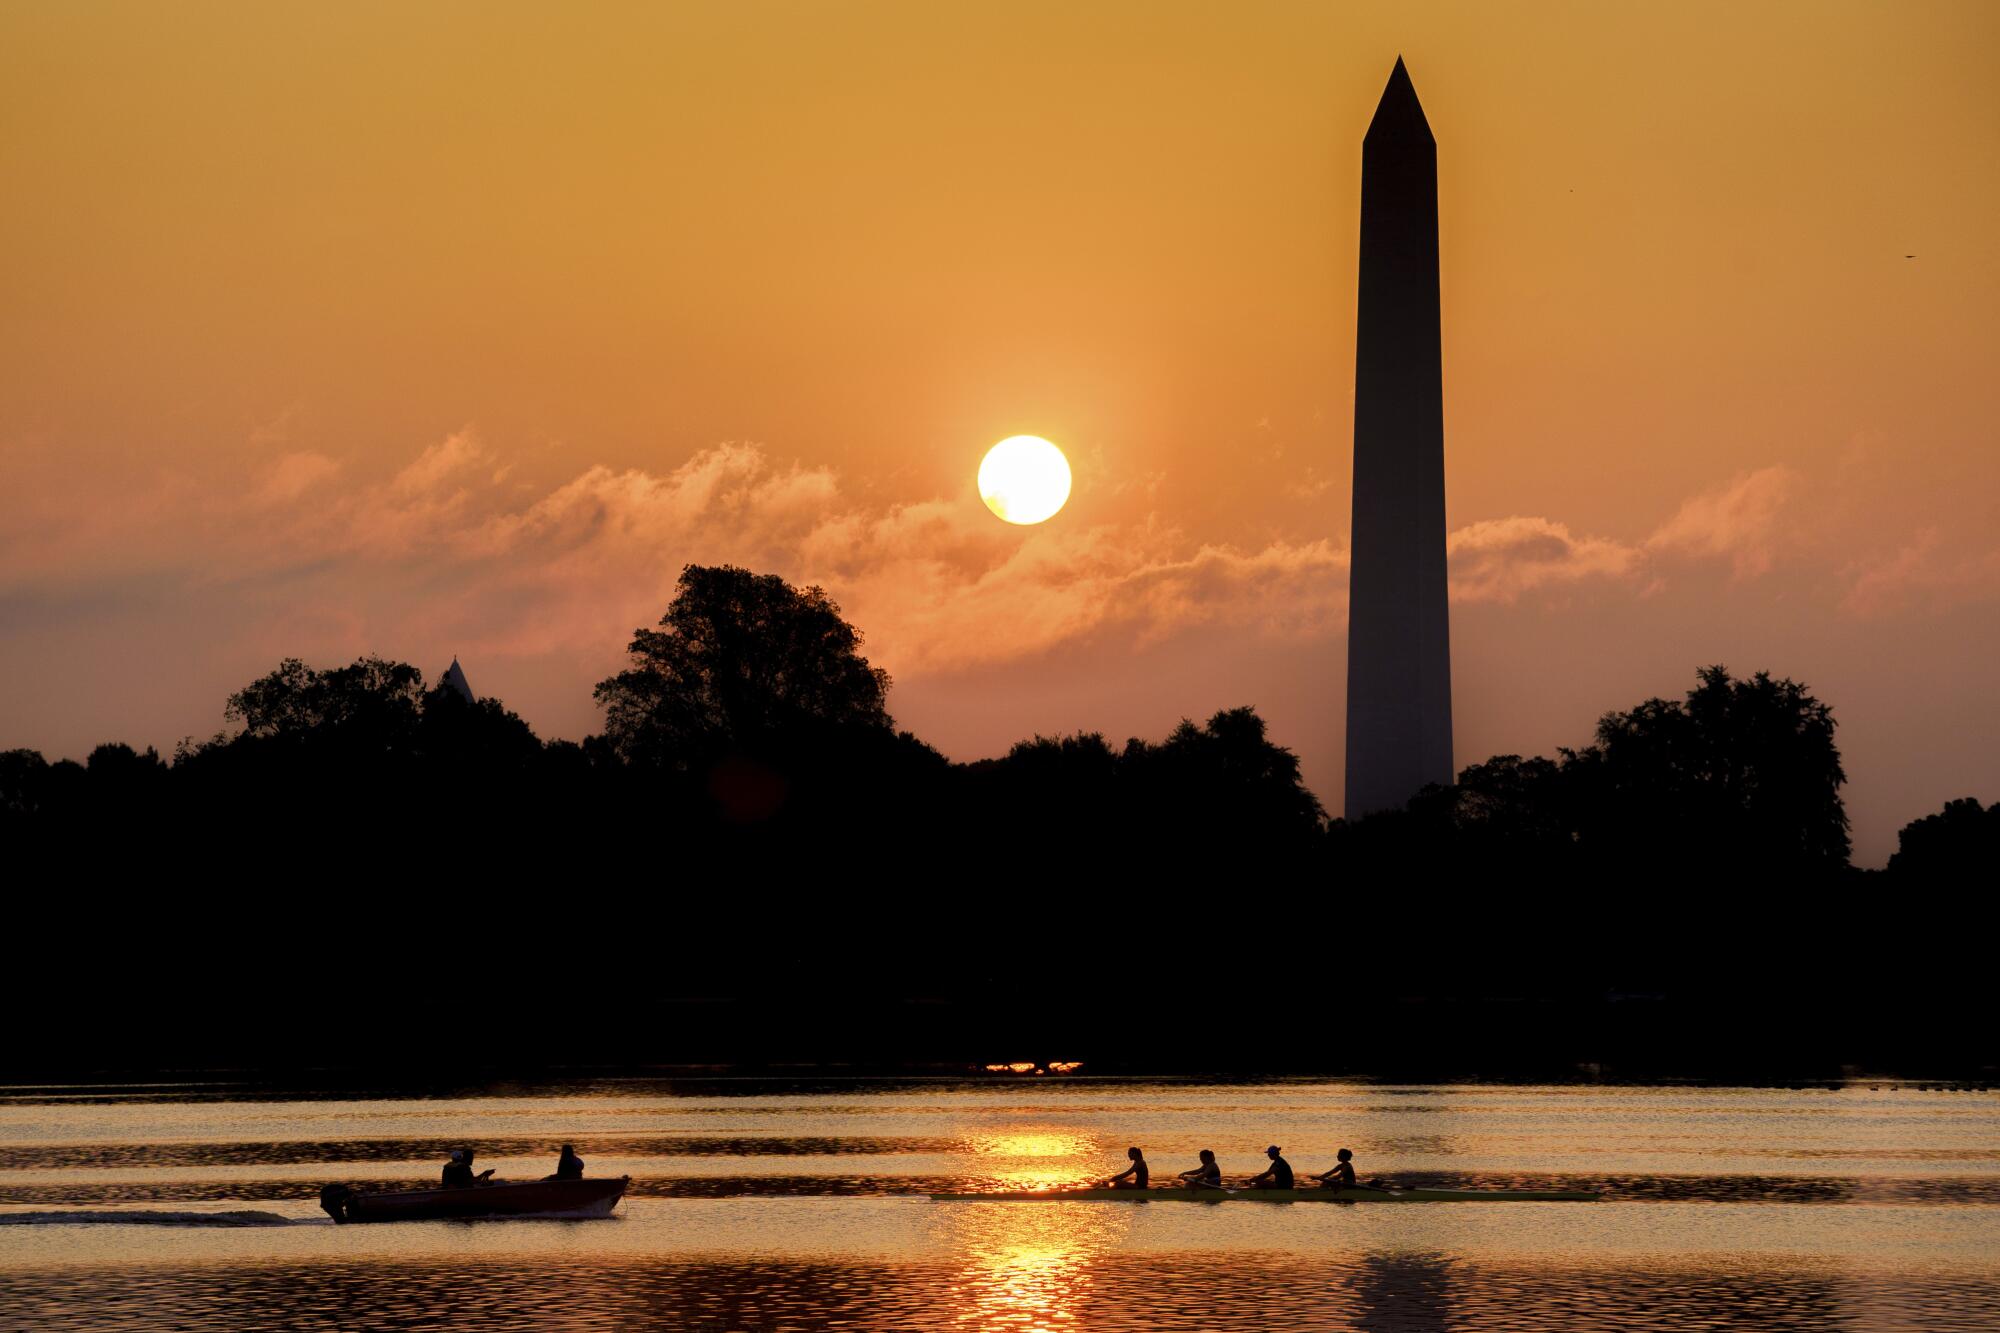 A rowing team glides along the Potomac River past the Washington Monument